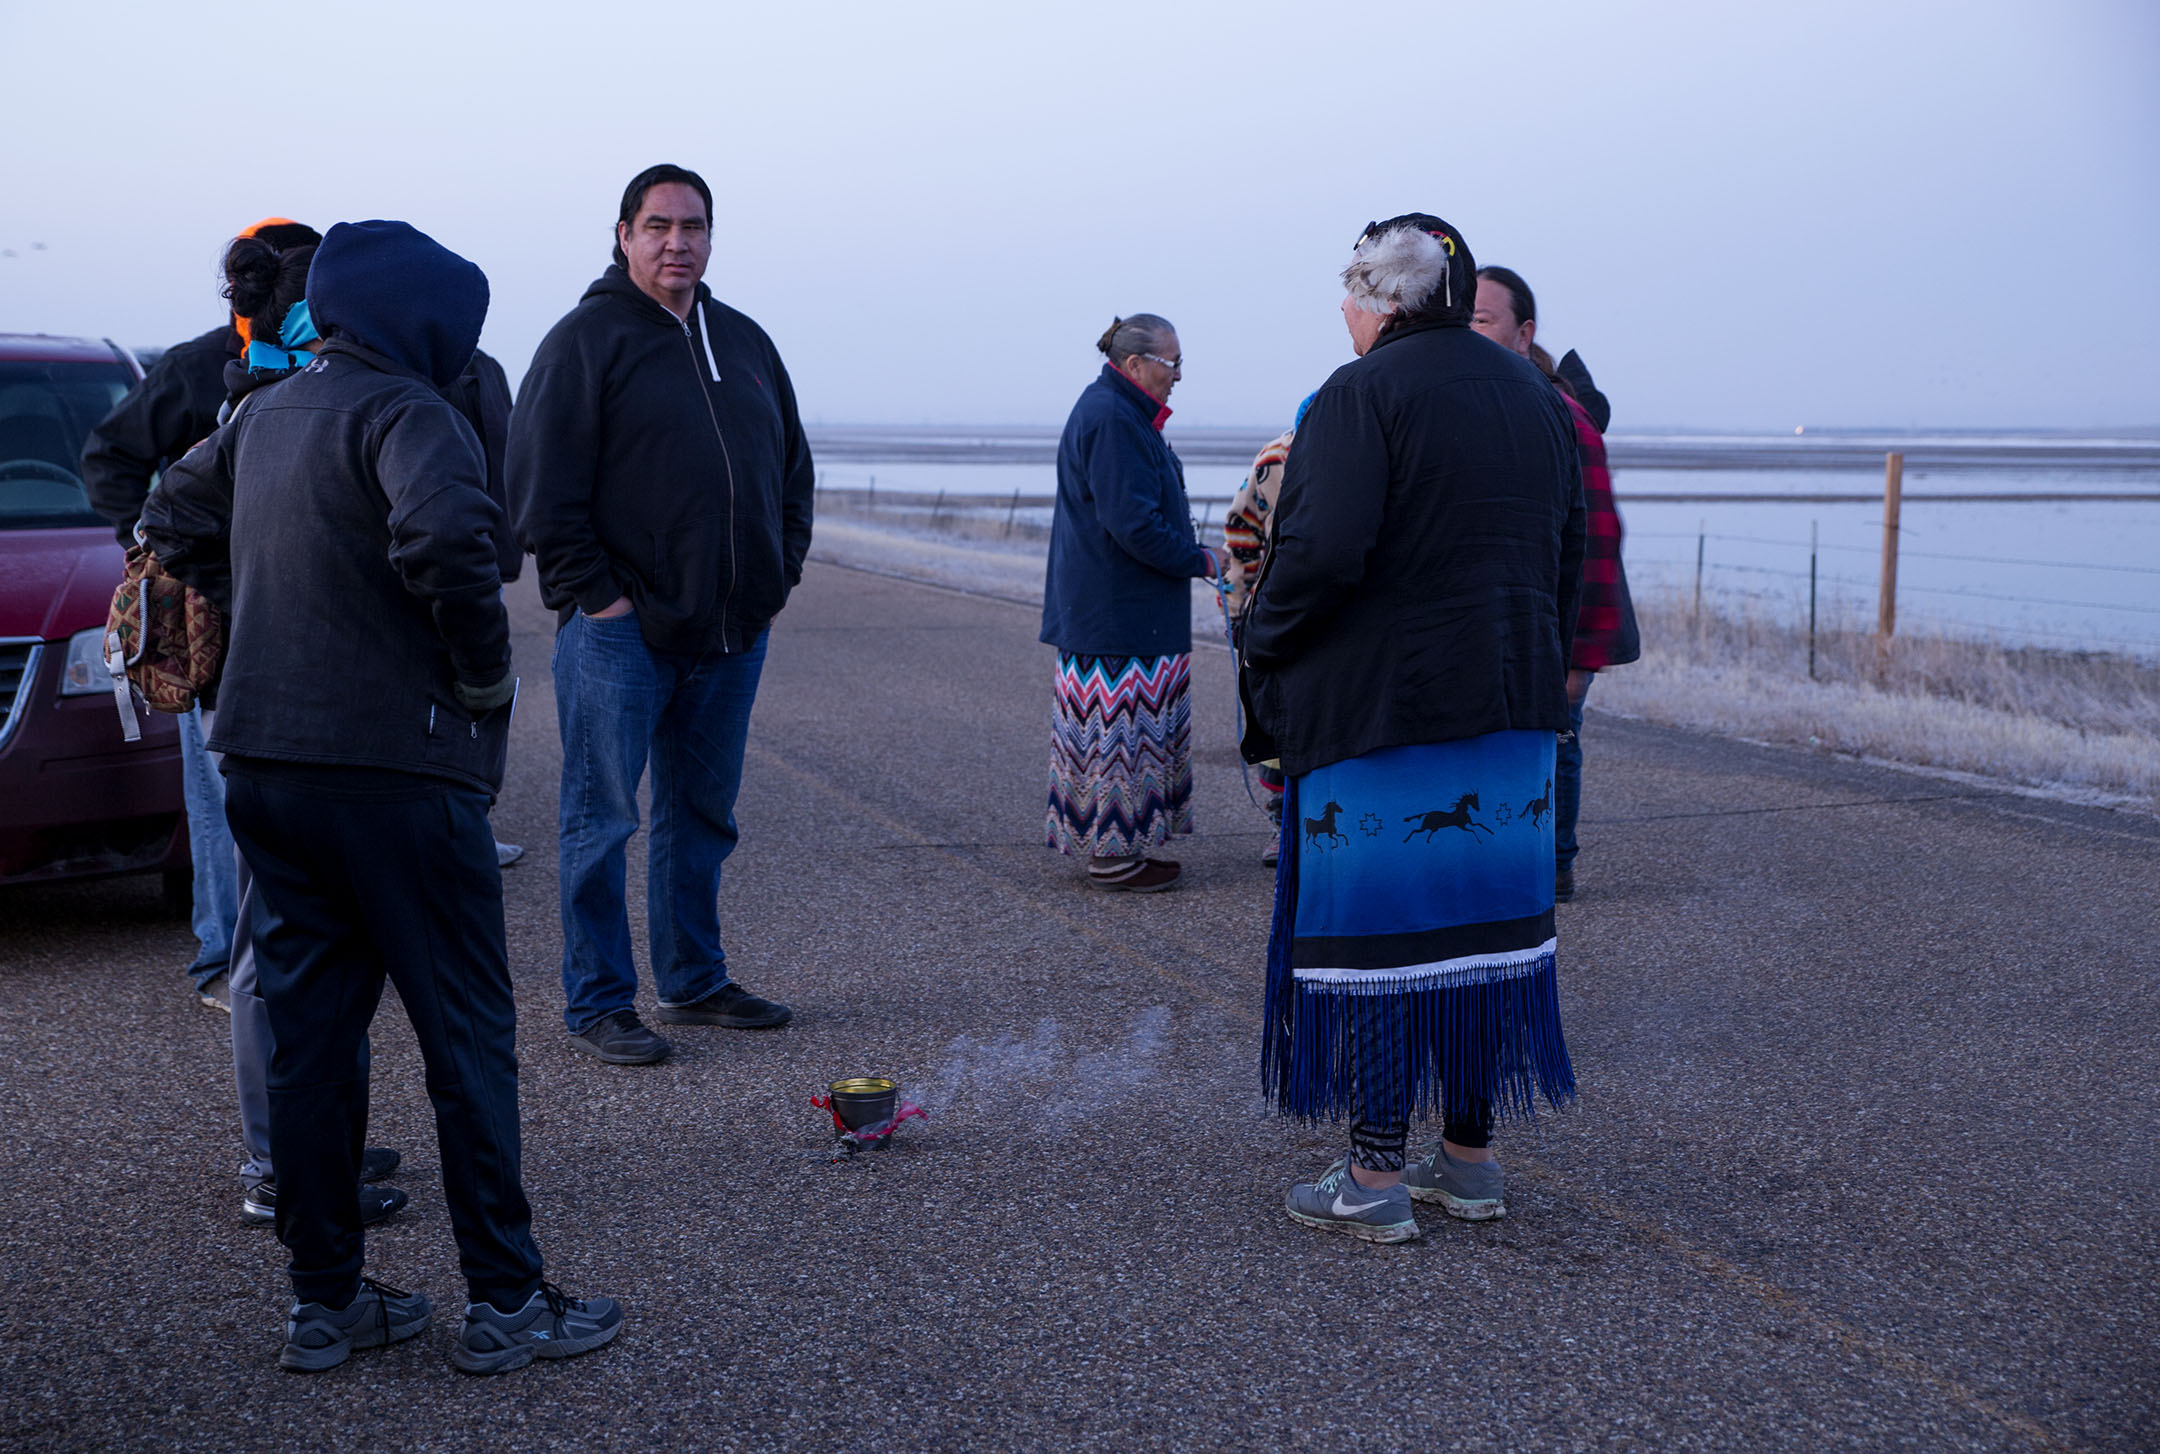 Lance Four Star, center, joins other members of the community in a water prayer during sunrise before they walk 100-miles, from the eastern to western border of the reservation, in protest of the Keystone XL pipeline on March 24, 2017.